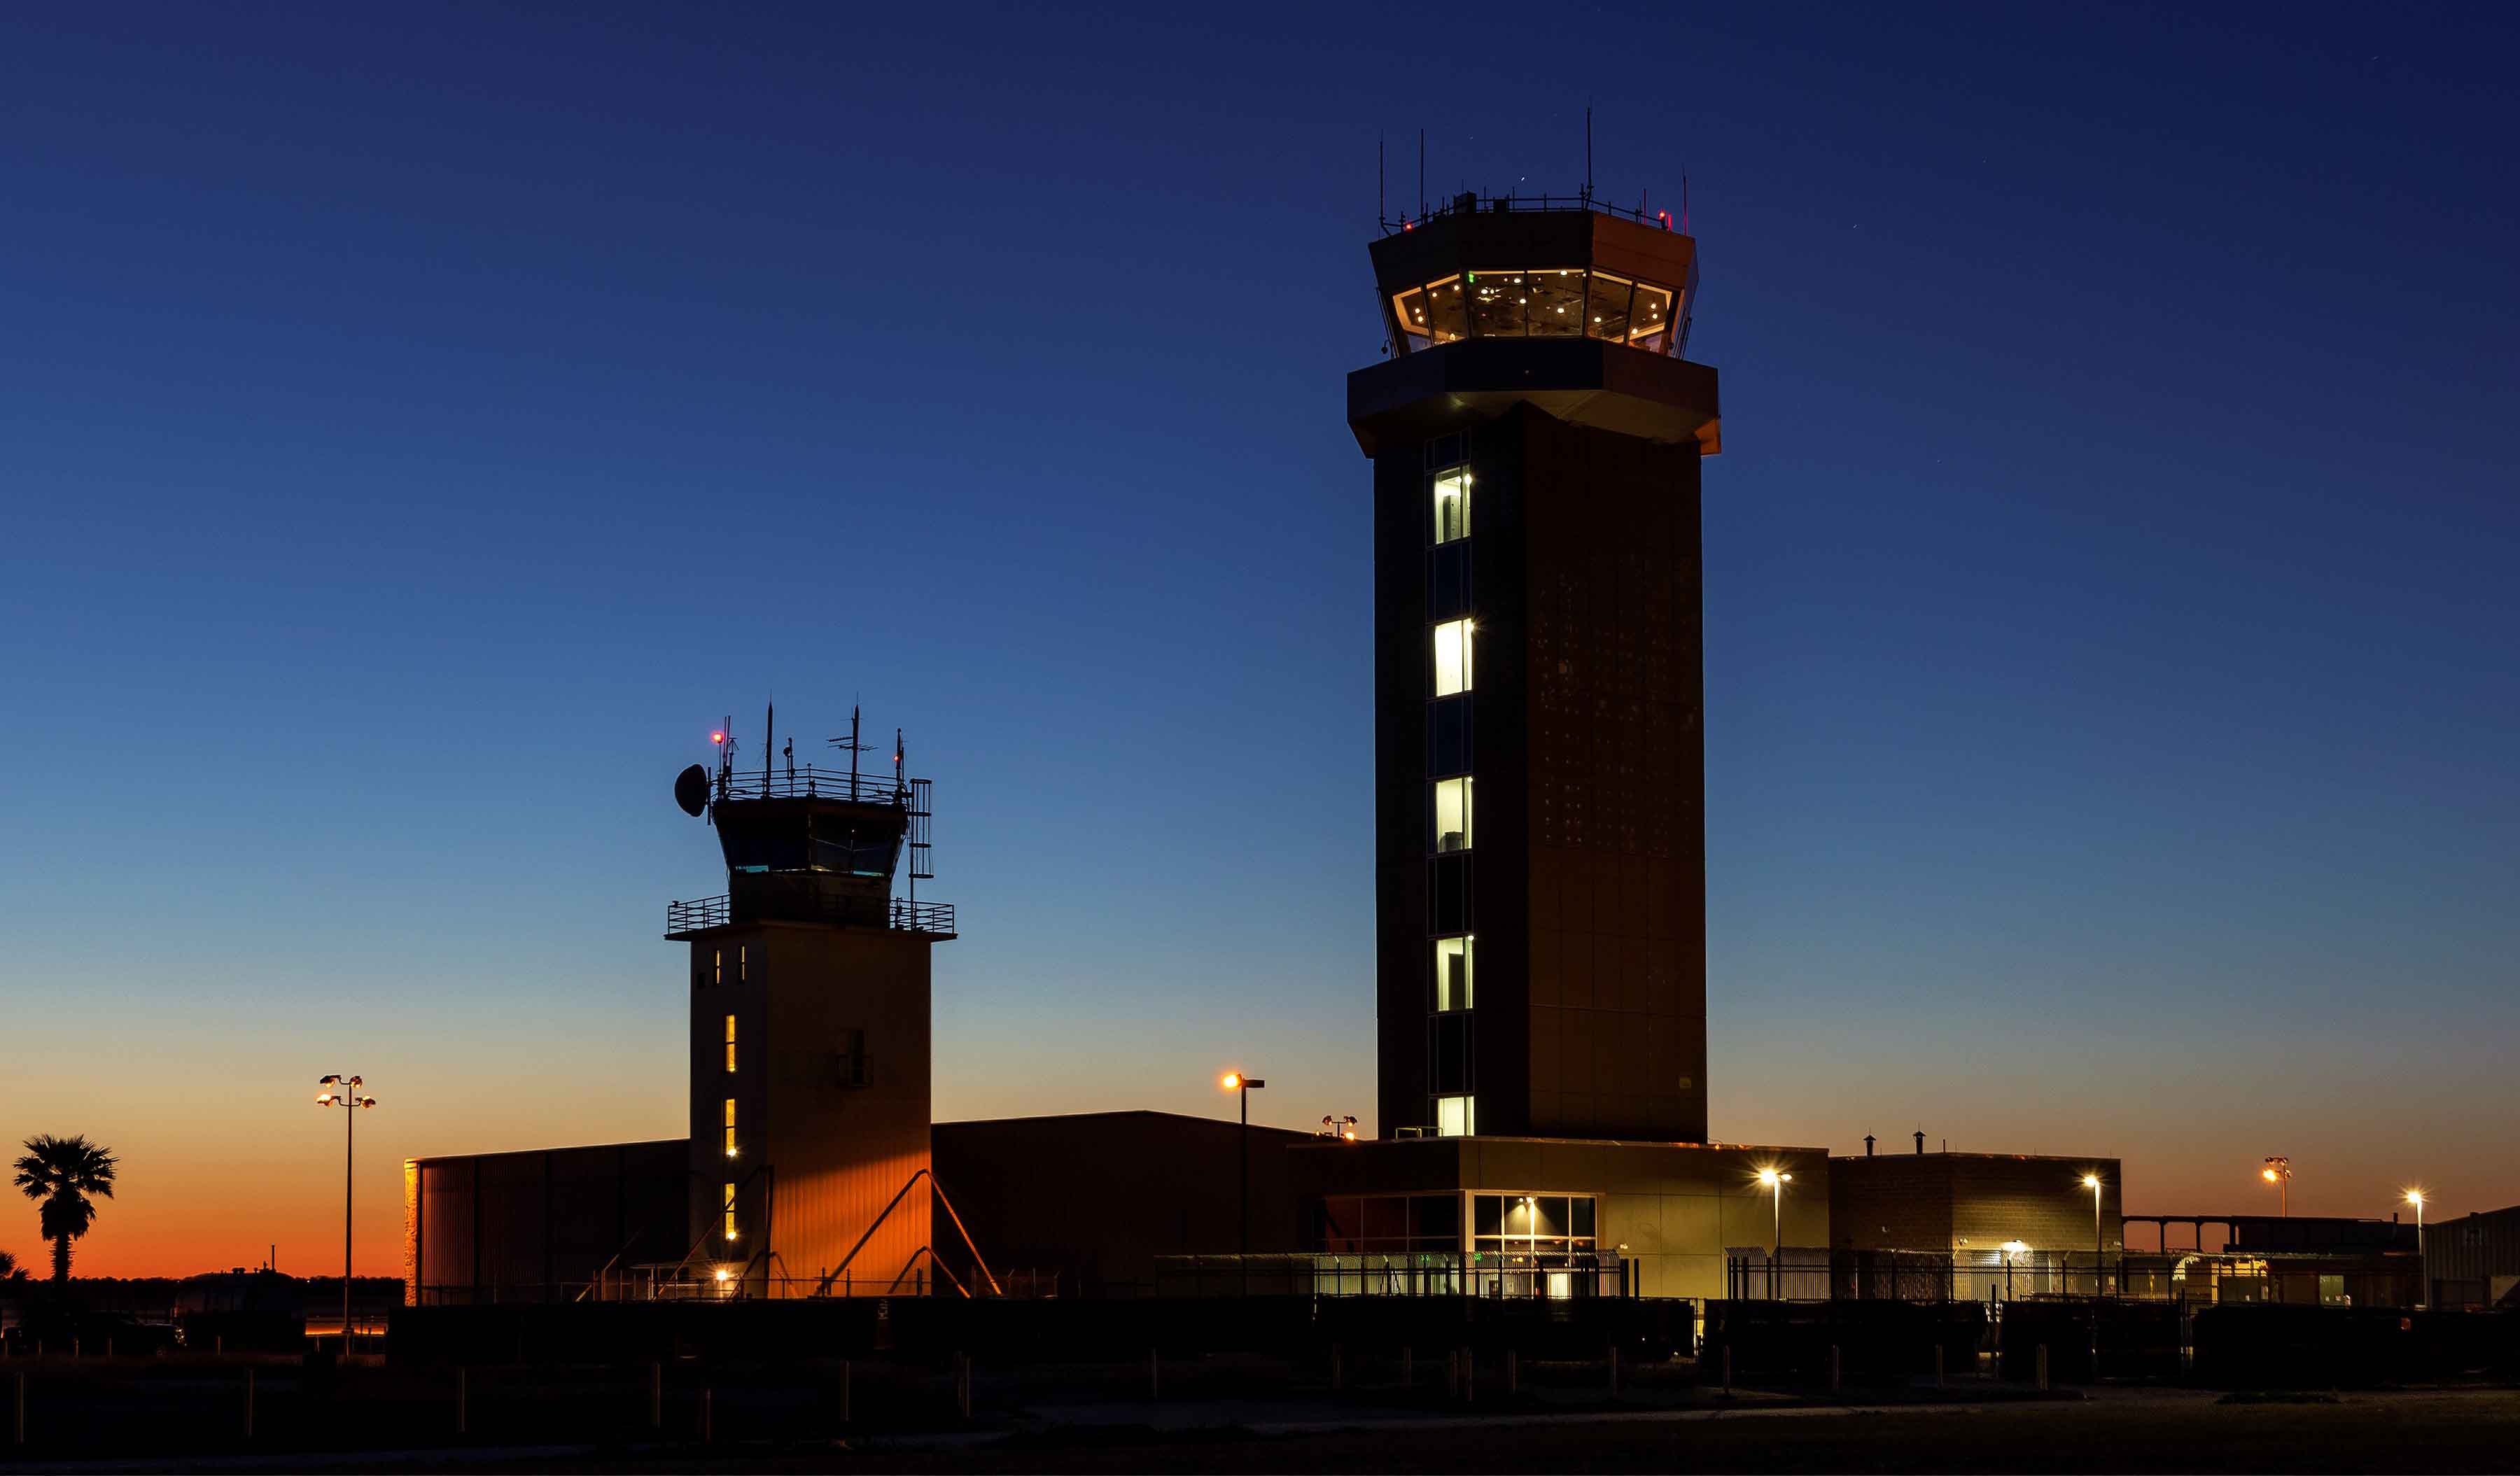 Air Traffic Control Tower and Utility Building